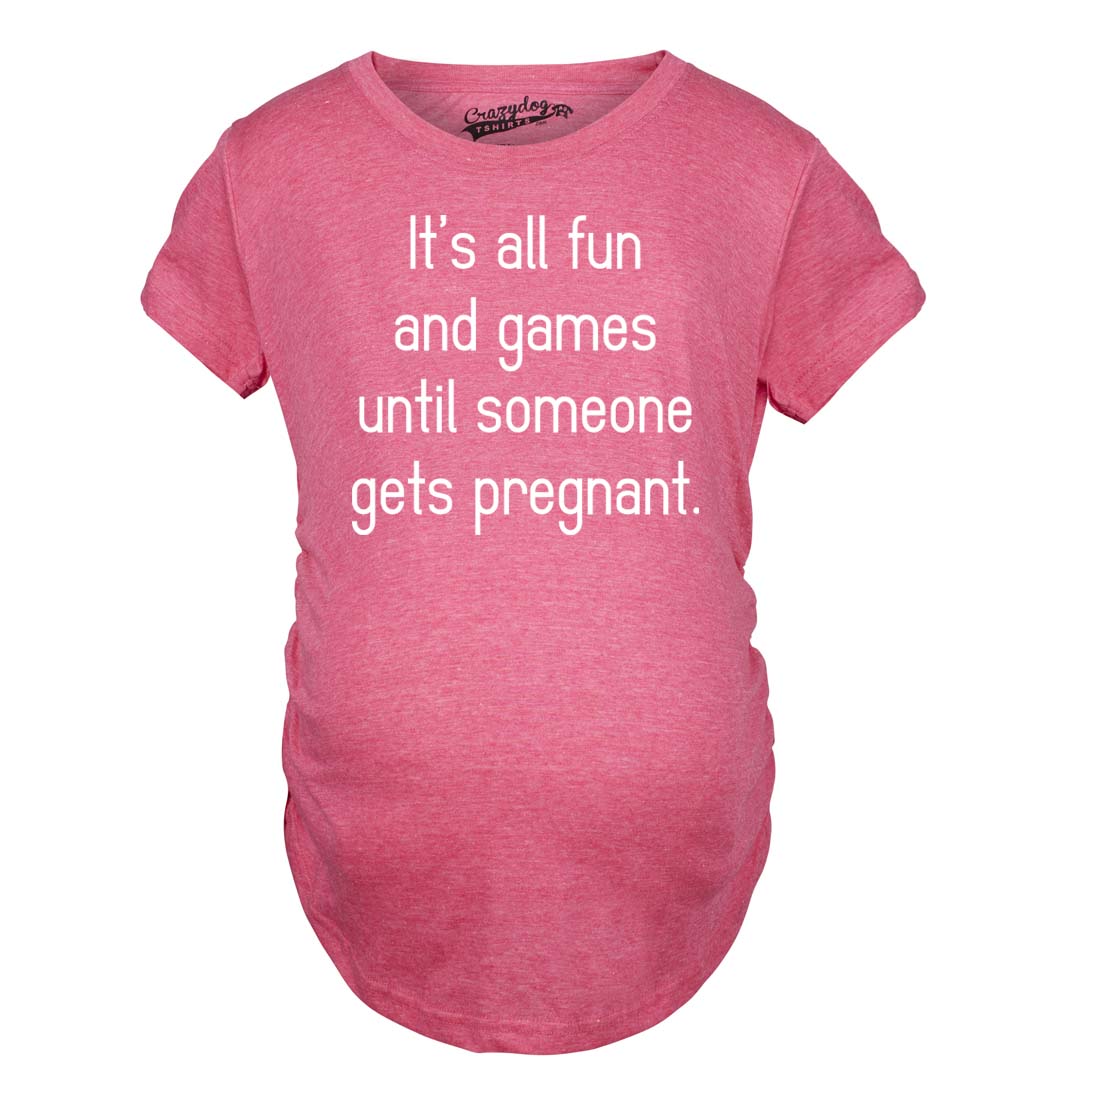 Funny Pink Fun And Games Maternity T Shirt Nerdy Tee